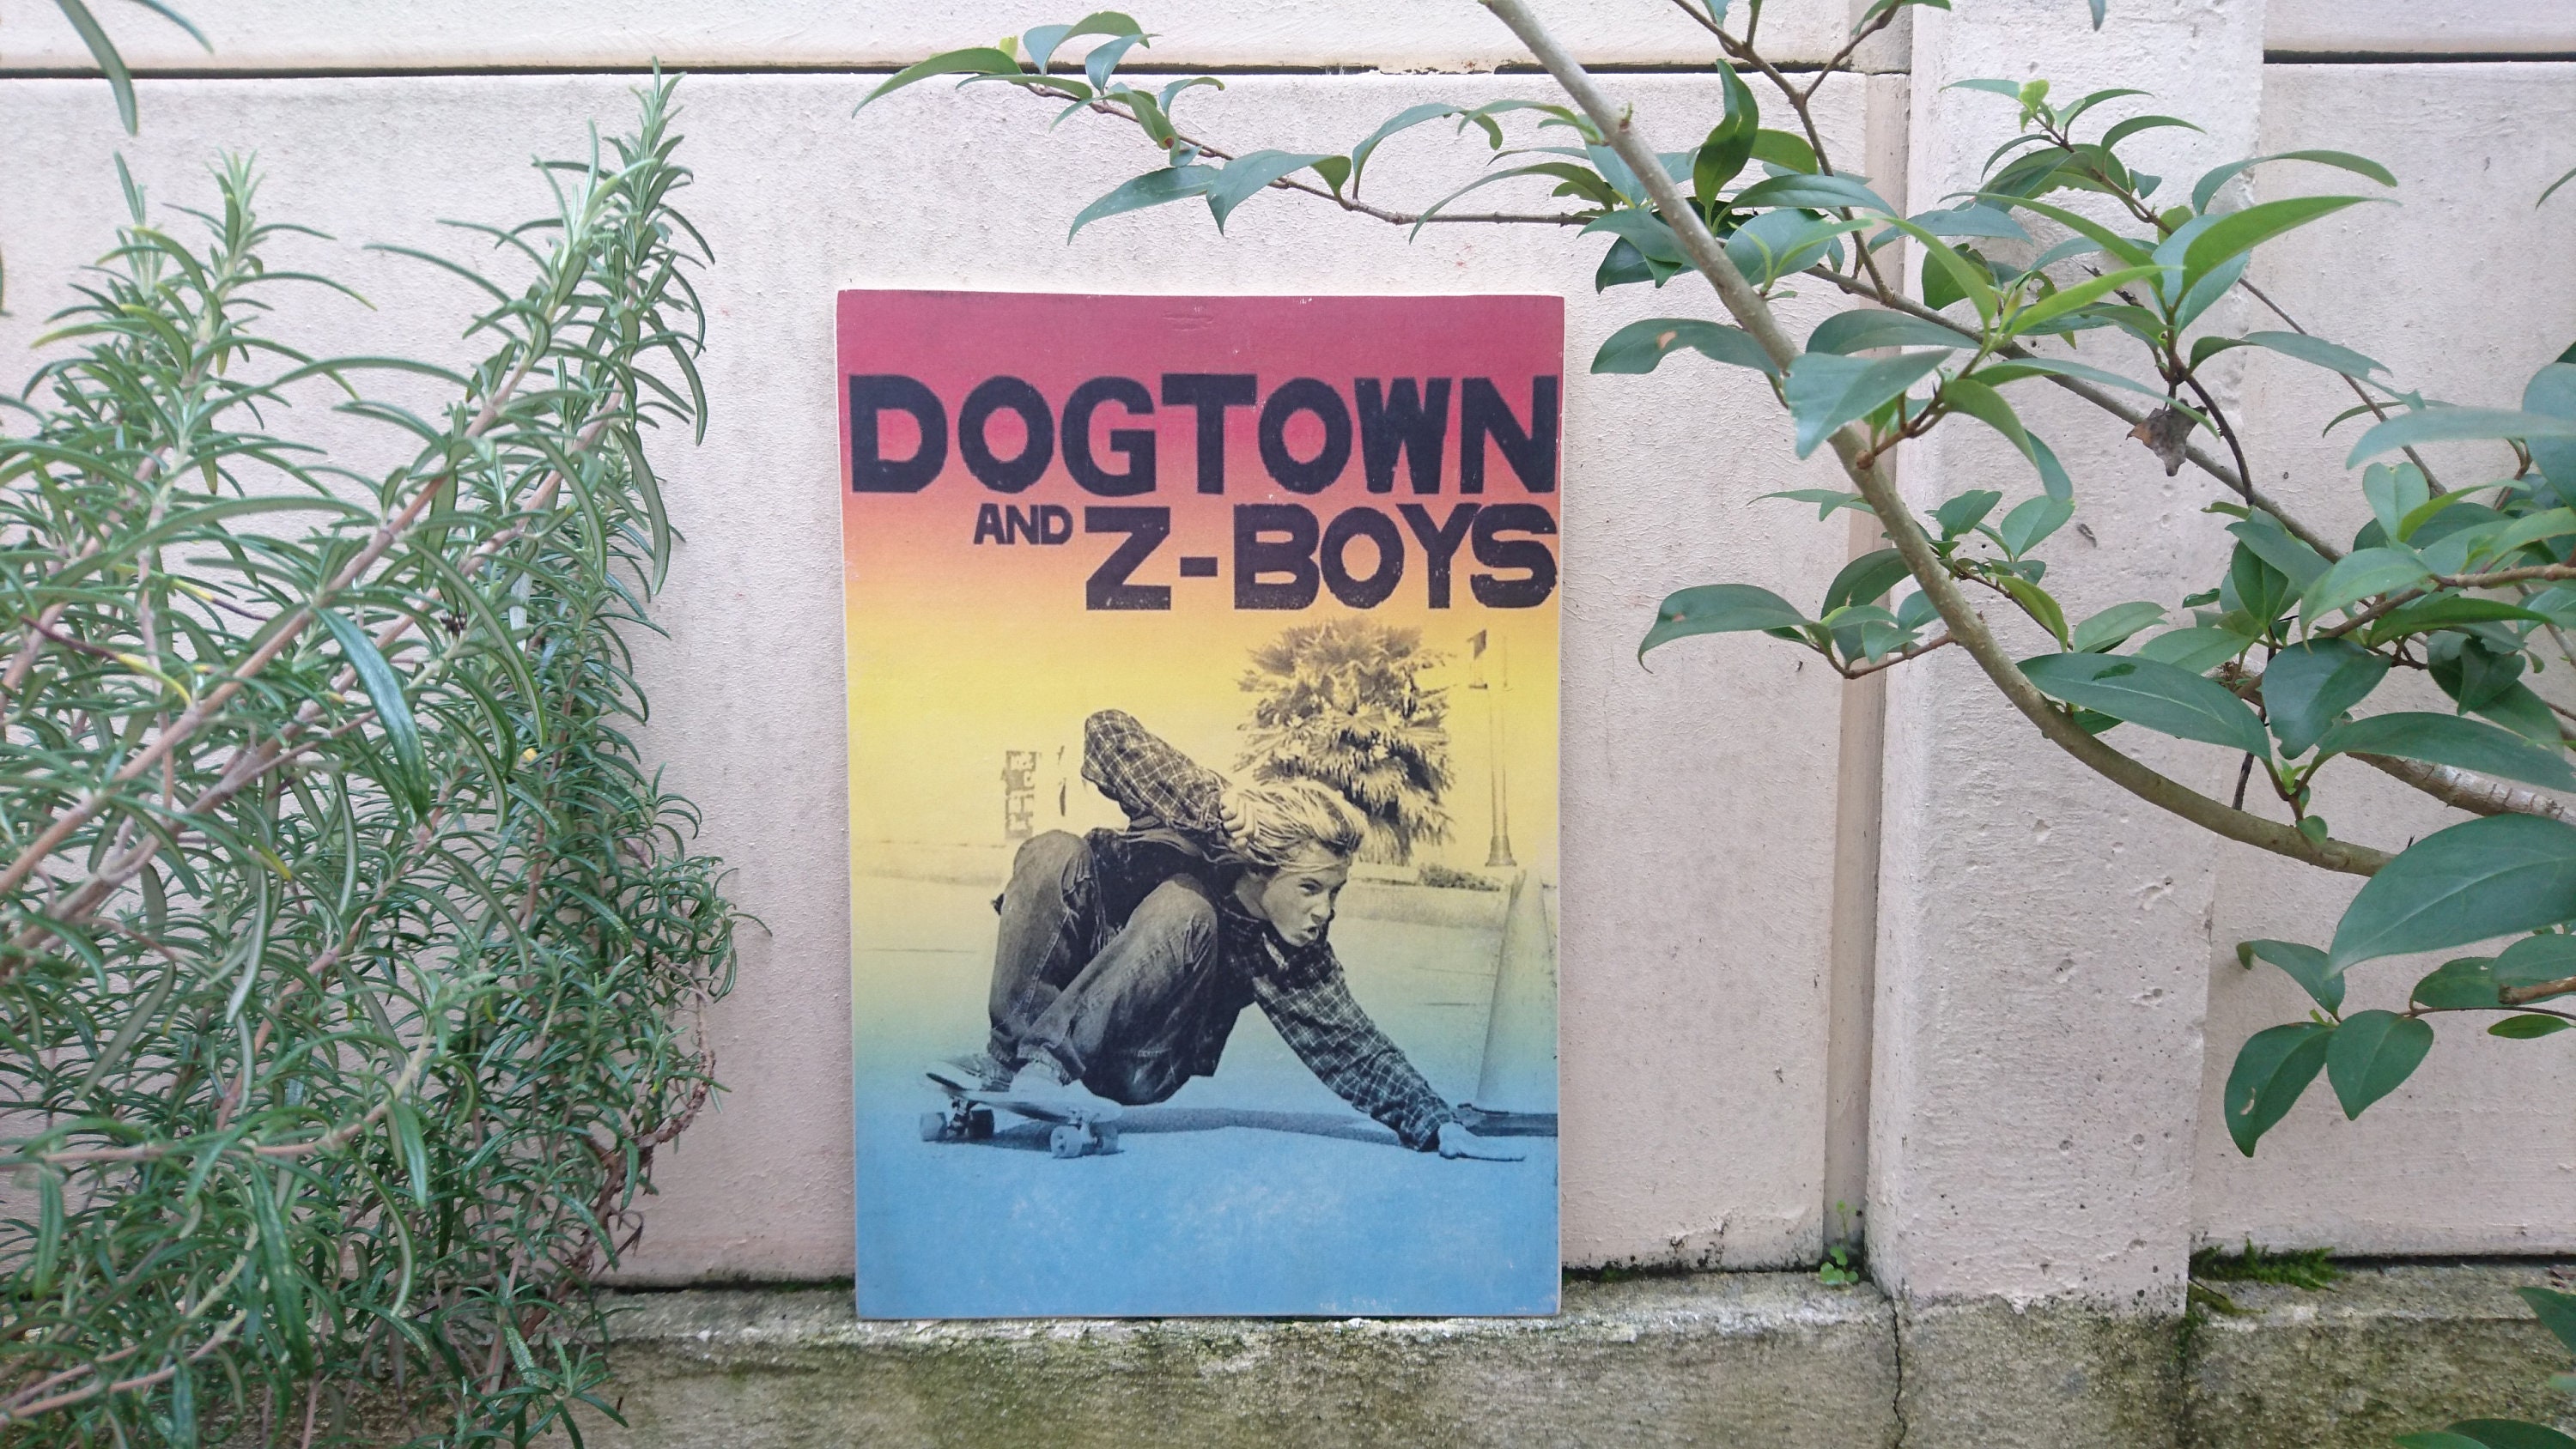 Lords of Dogtown Art Board Print for Sale by hamjudyd